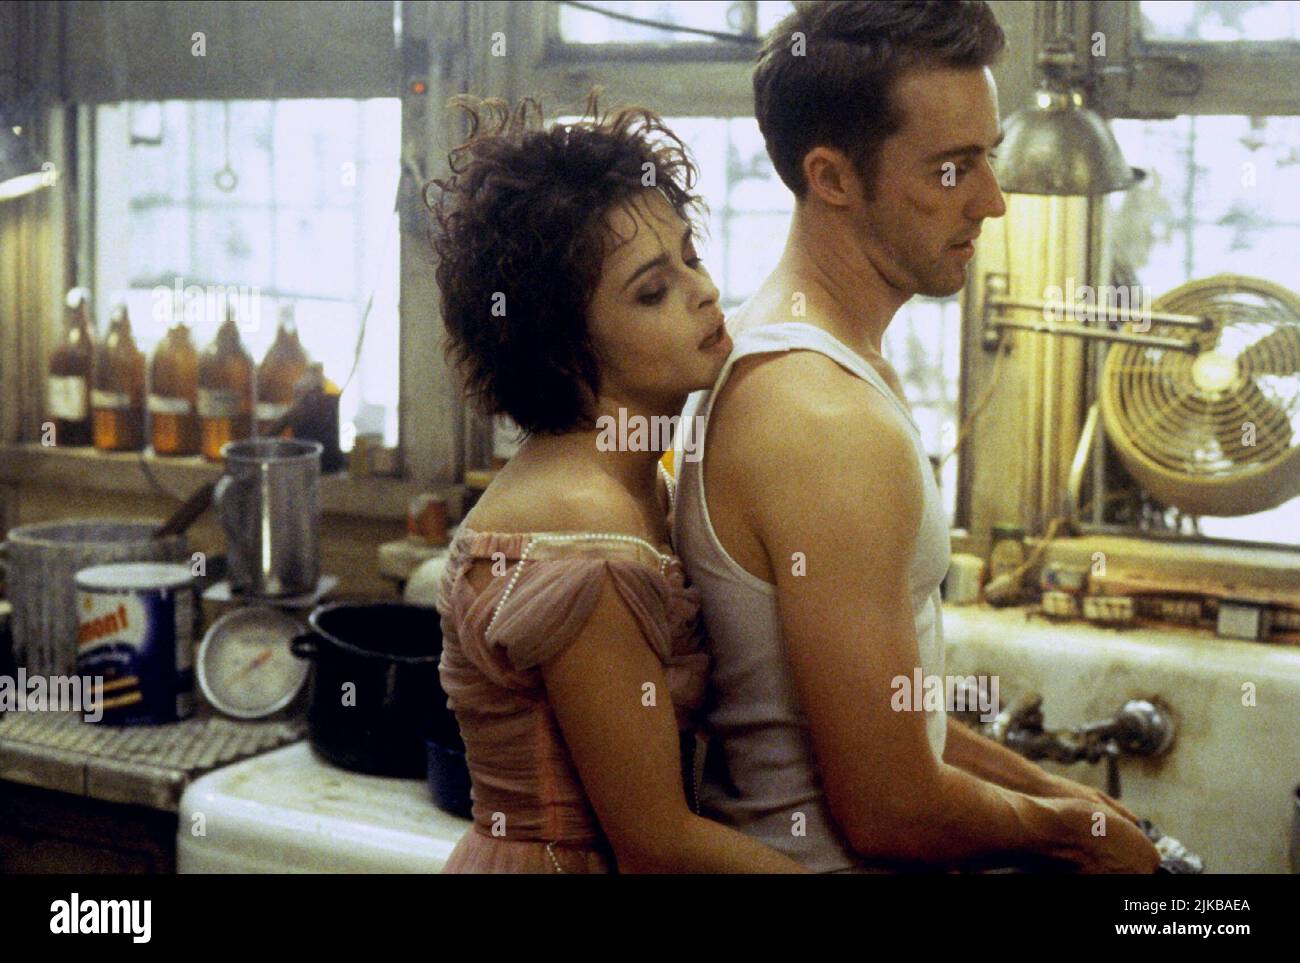 Helena Bonham Carter & Edward Norton Film: Fight Club (USA/DE 1999)  Characters: Marla Singer & The Narrator Director: David Fincher 10  September 1999 **WARNING** This Photograph is for editorial use only and